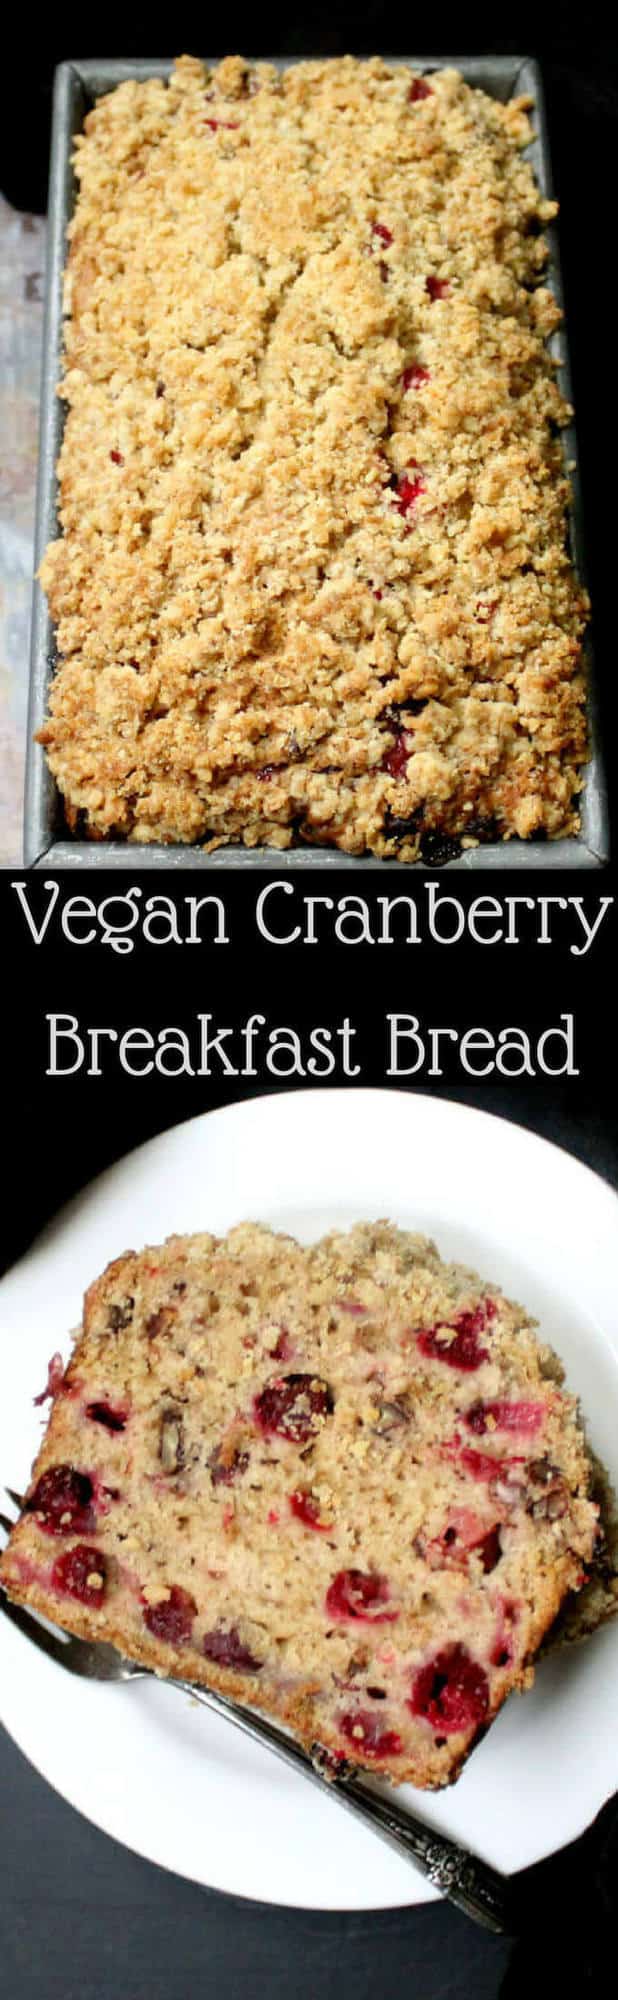 Cranberry bread images with text inlay that says "vegan cranberry breakfast bread"